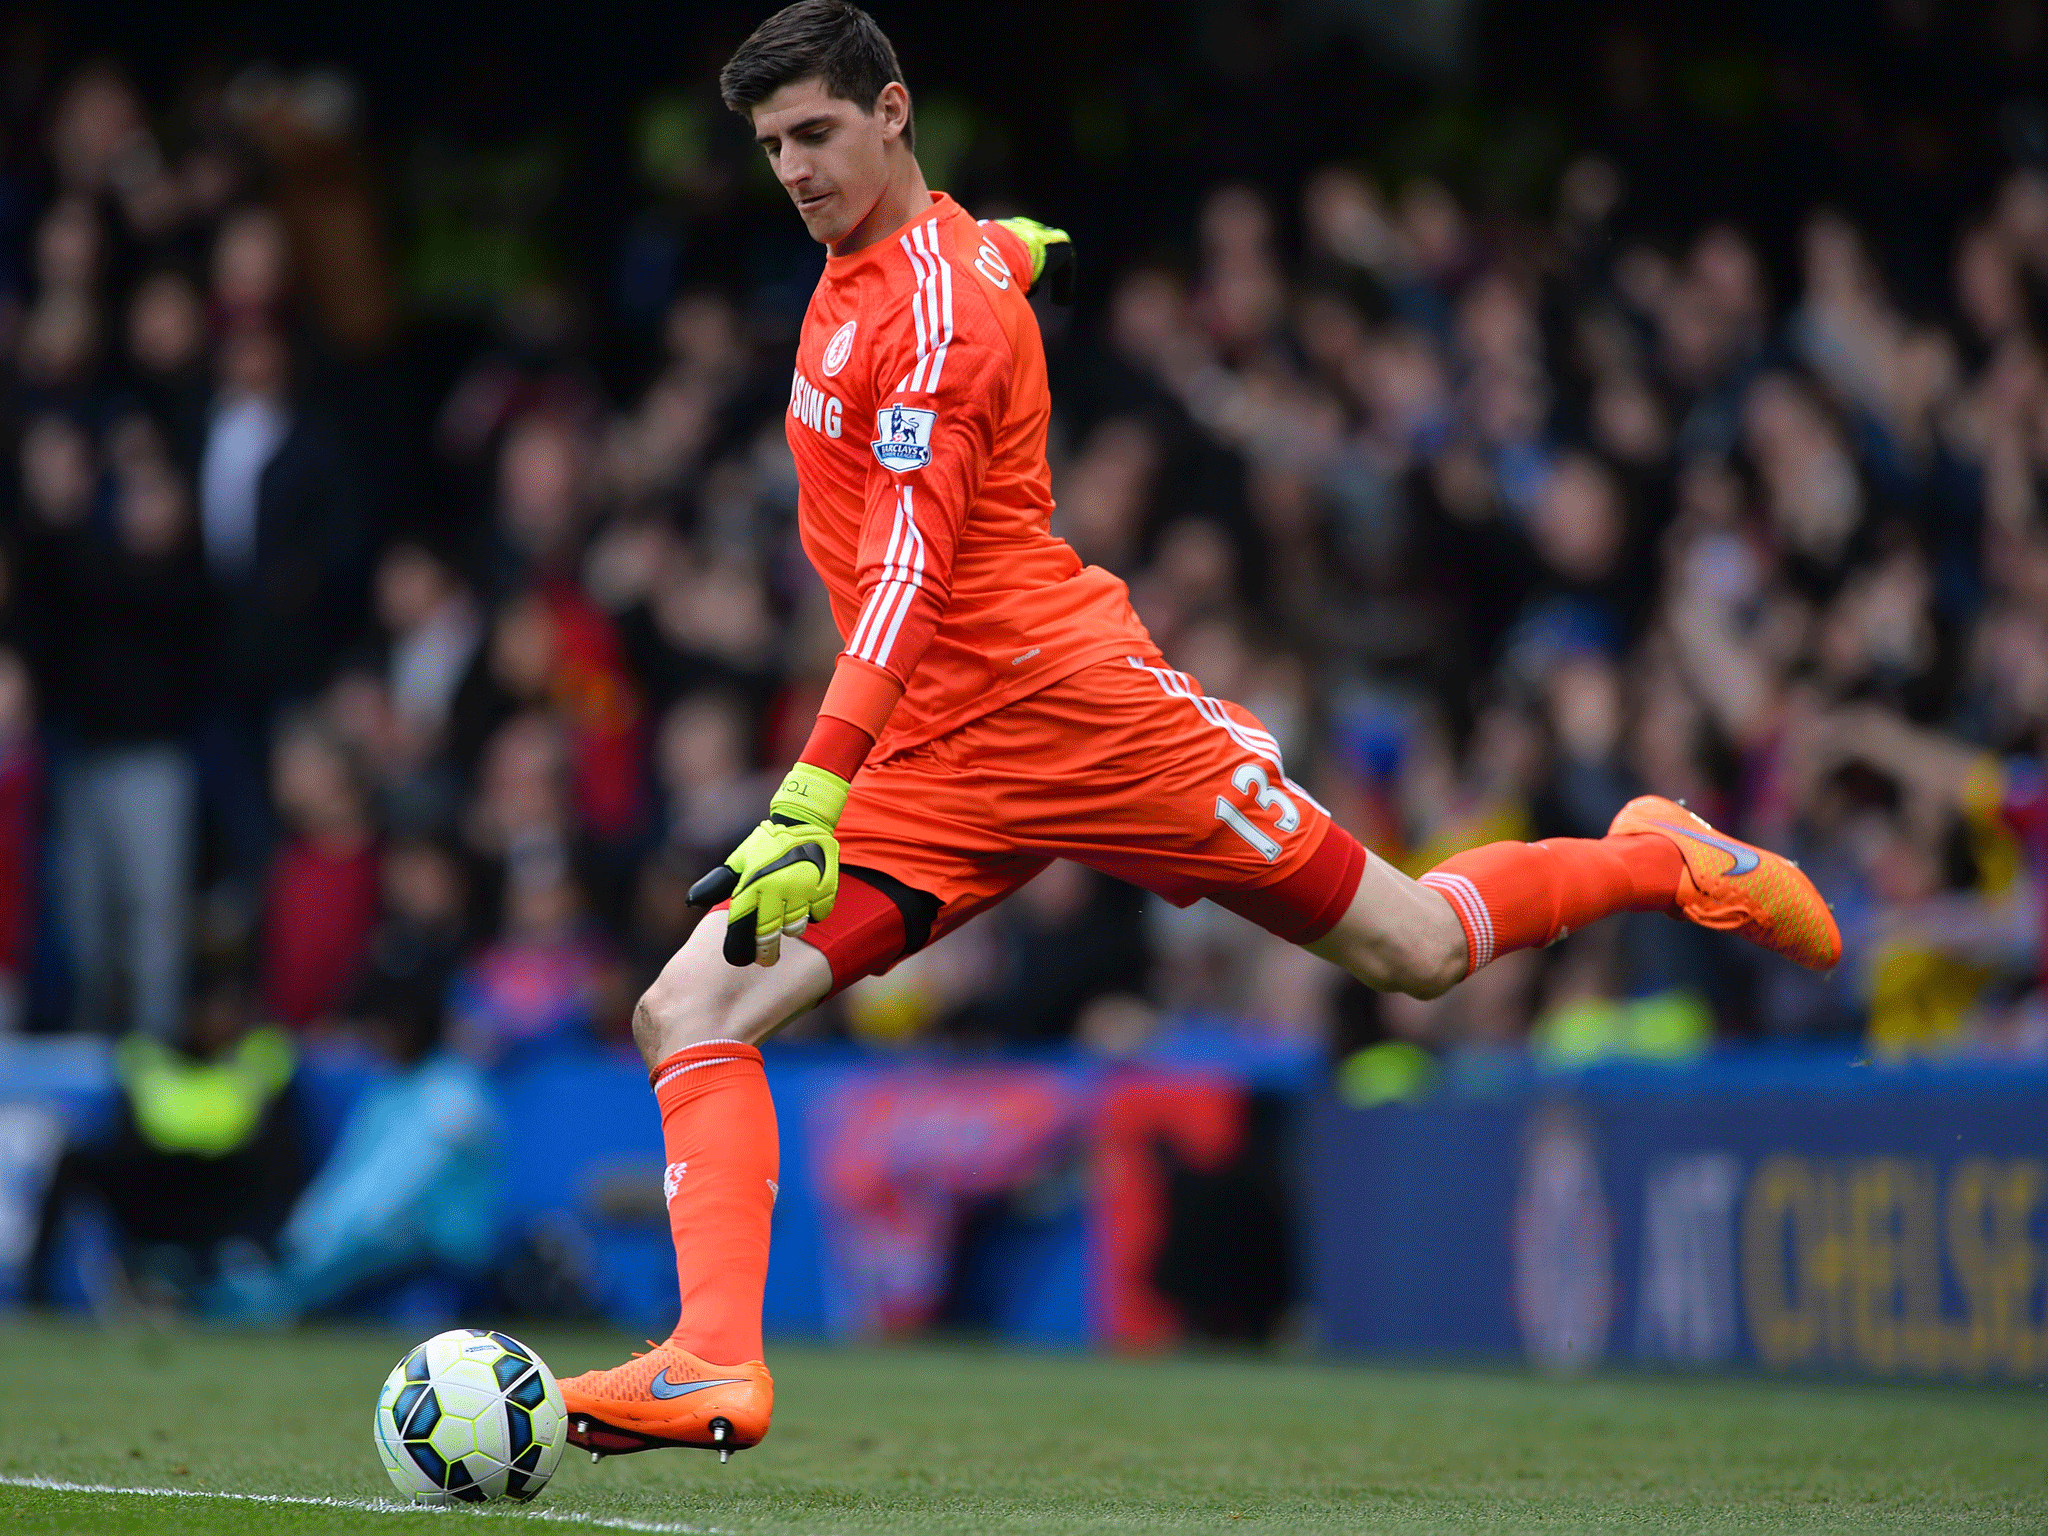 Chelsea face 'battle' to hold on to Courtois amid Real desire